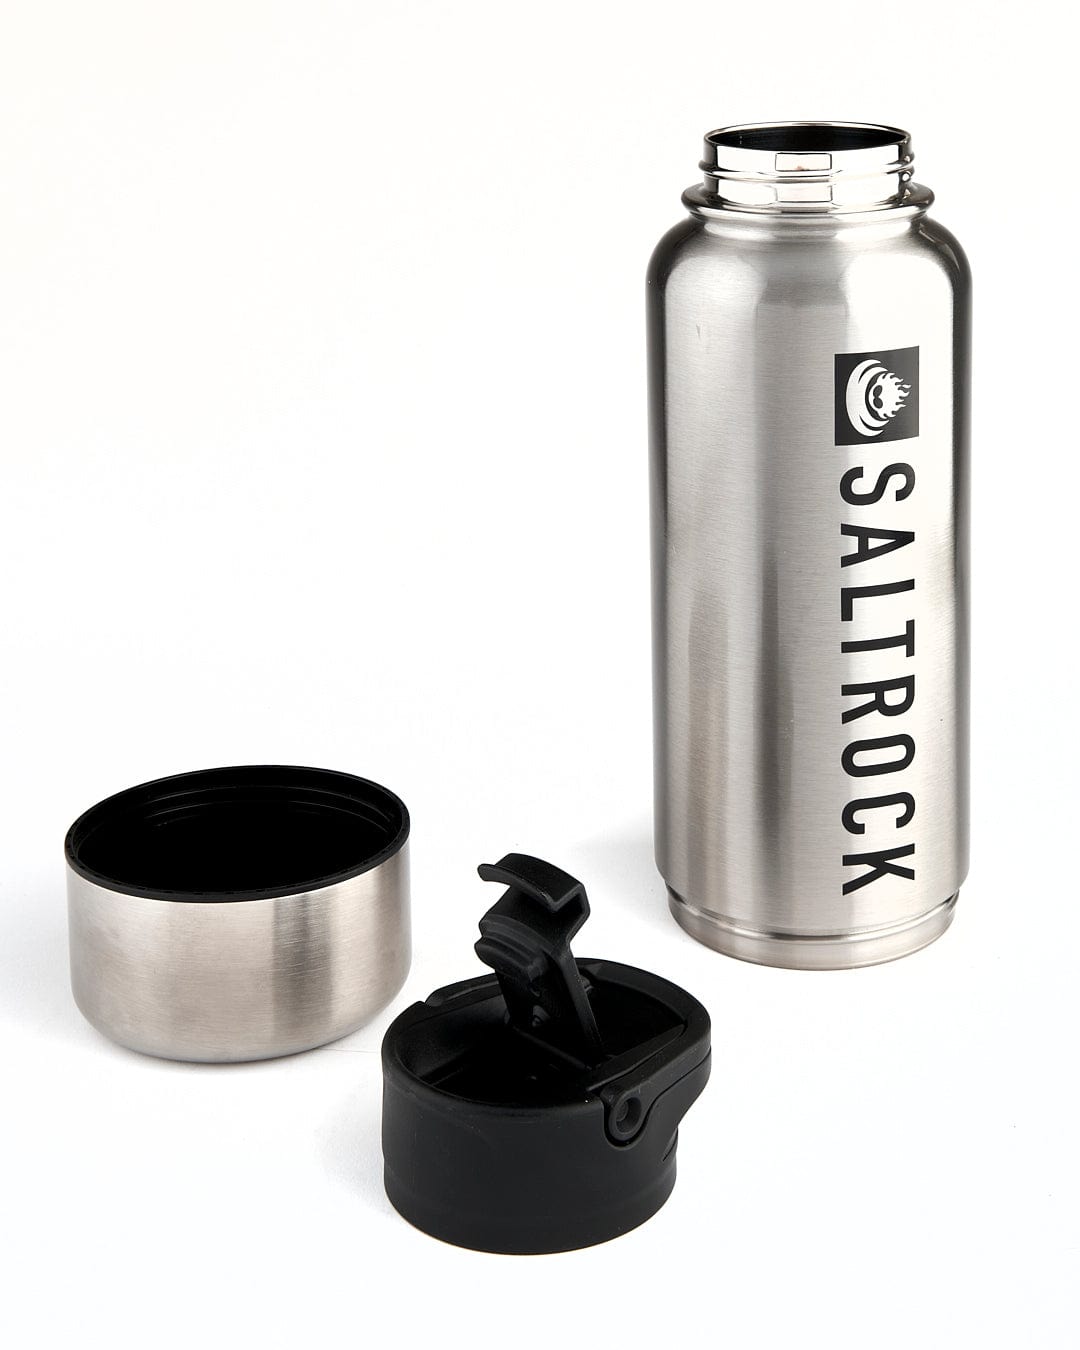 A 32 oz capacity Stash stainless steel water bottle with a double-walled design and black lid by Saltrock.